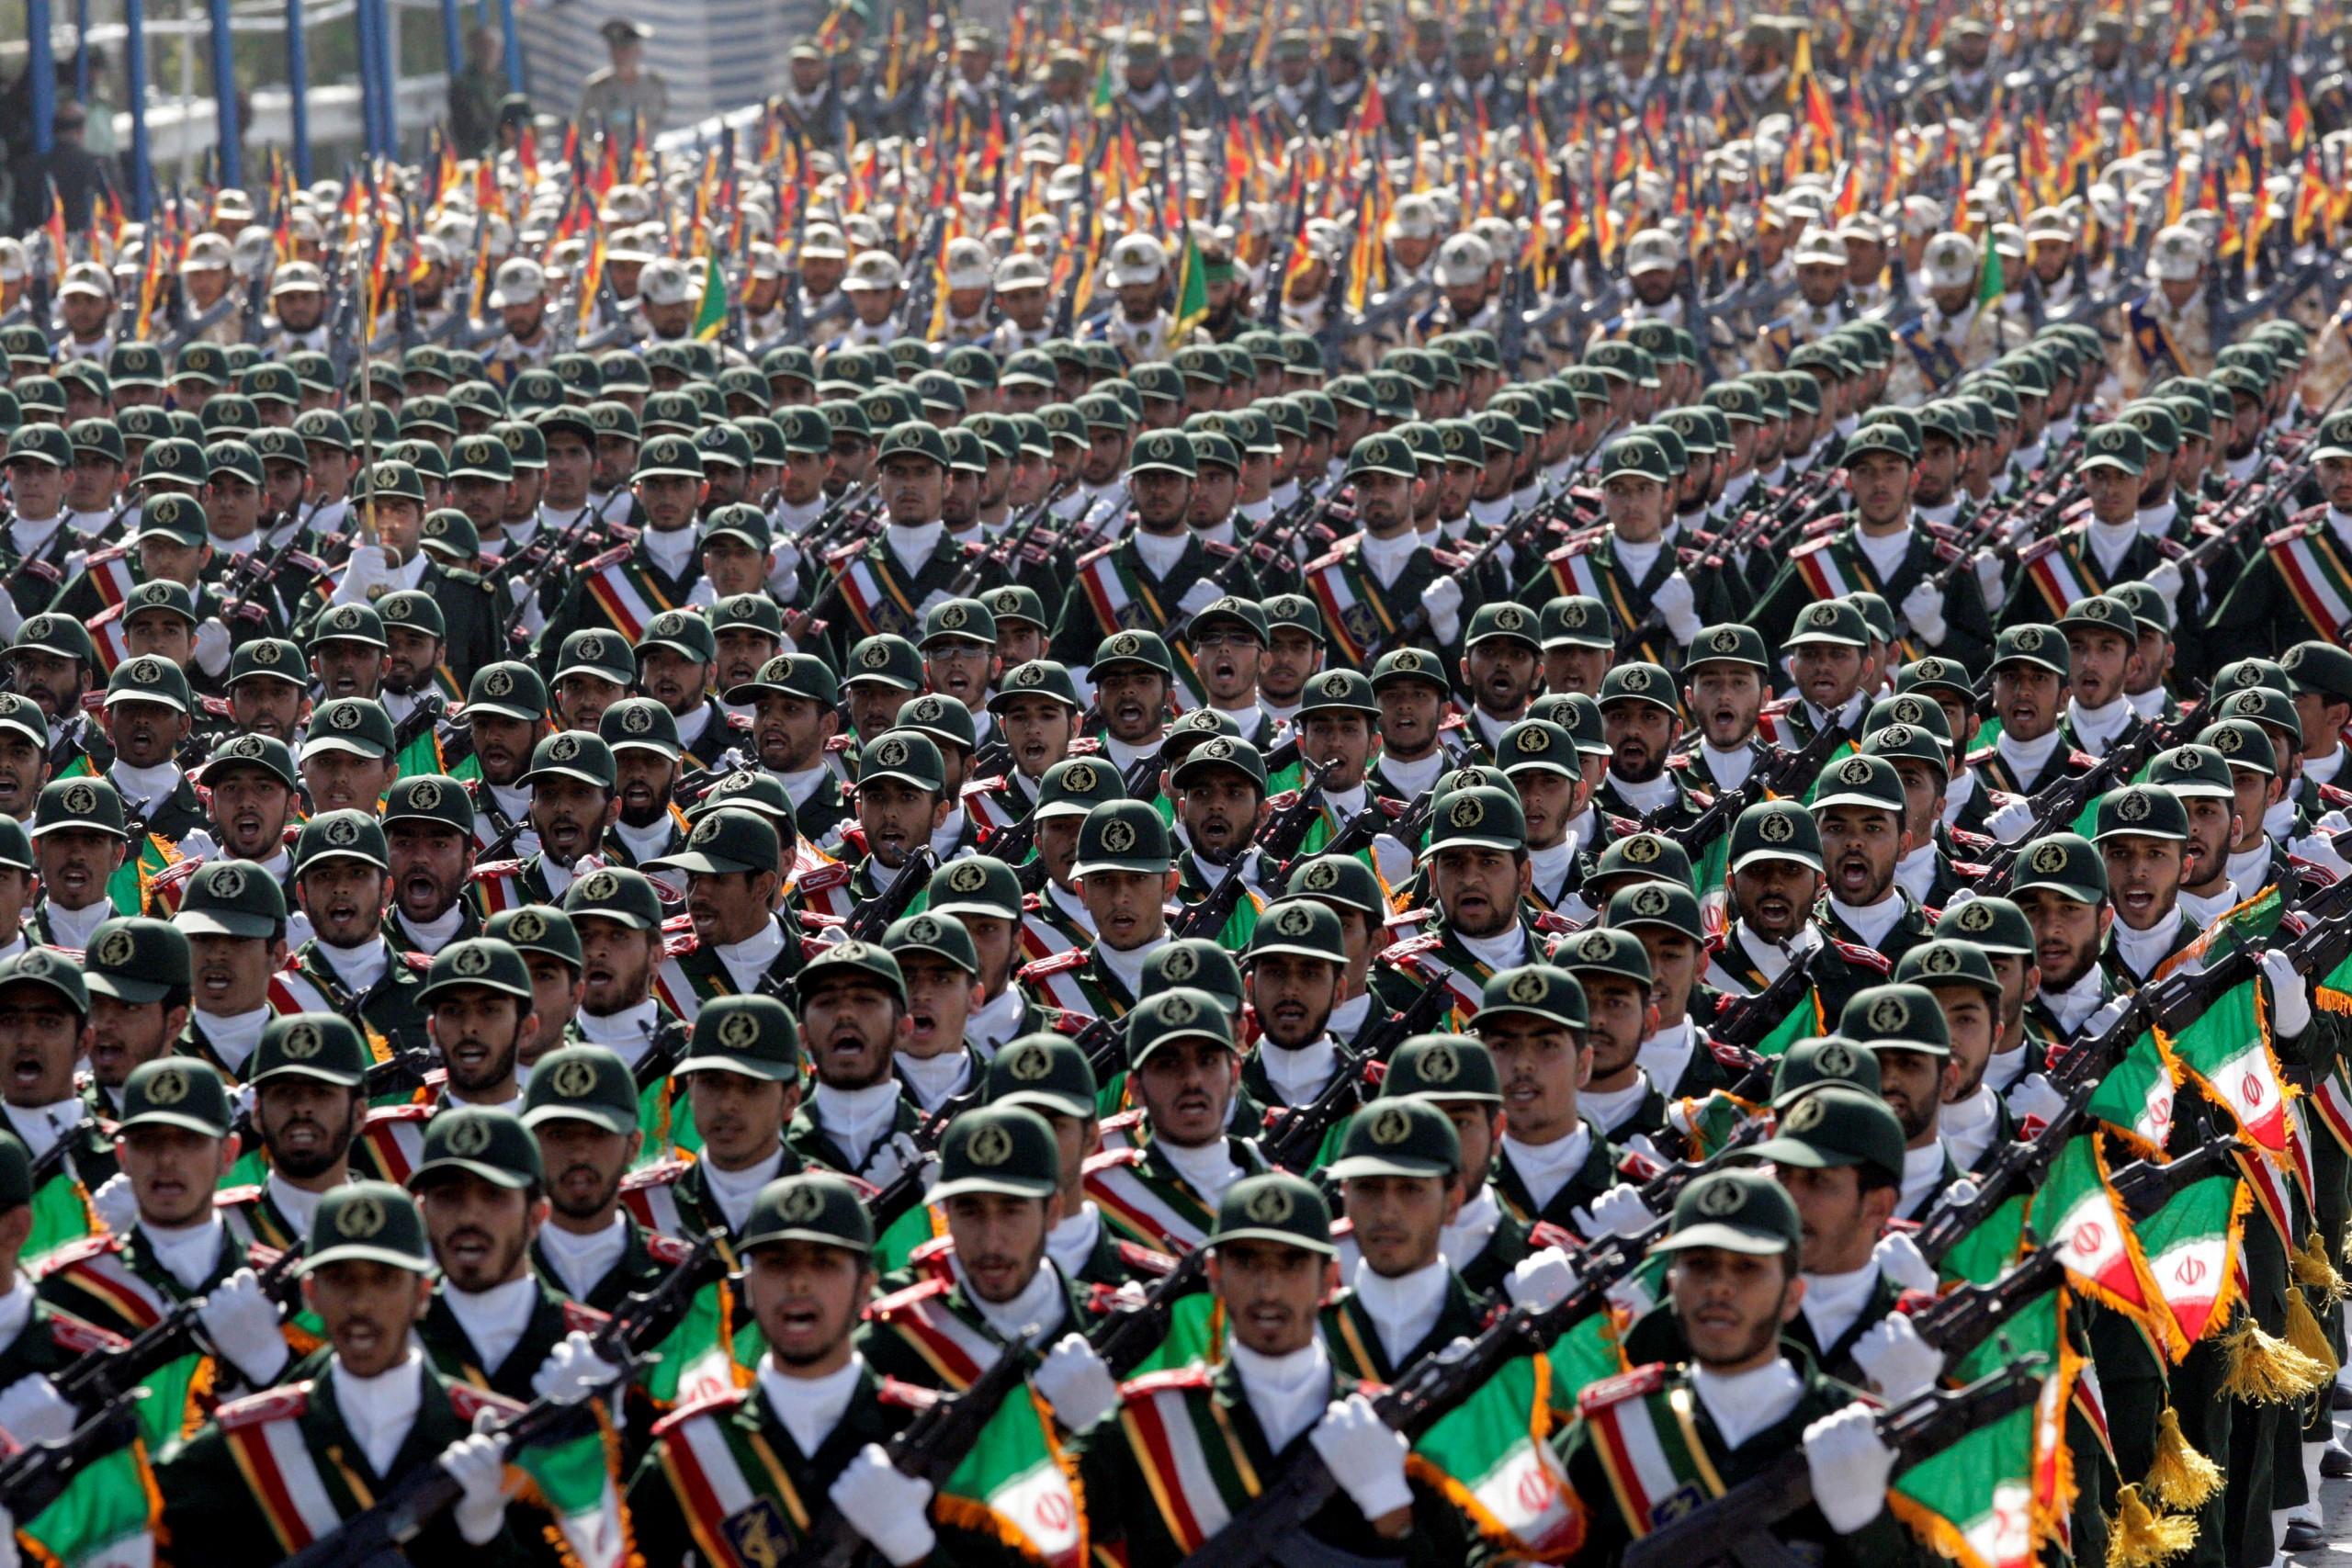 Iran’s Revolutionary Guard troops march, during a military parade commemorating the start of the Iraq-Iran war 32 years ago